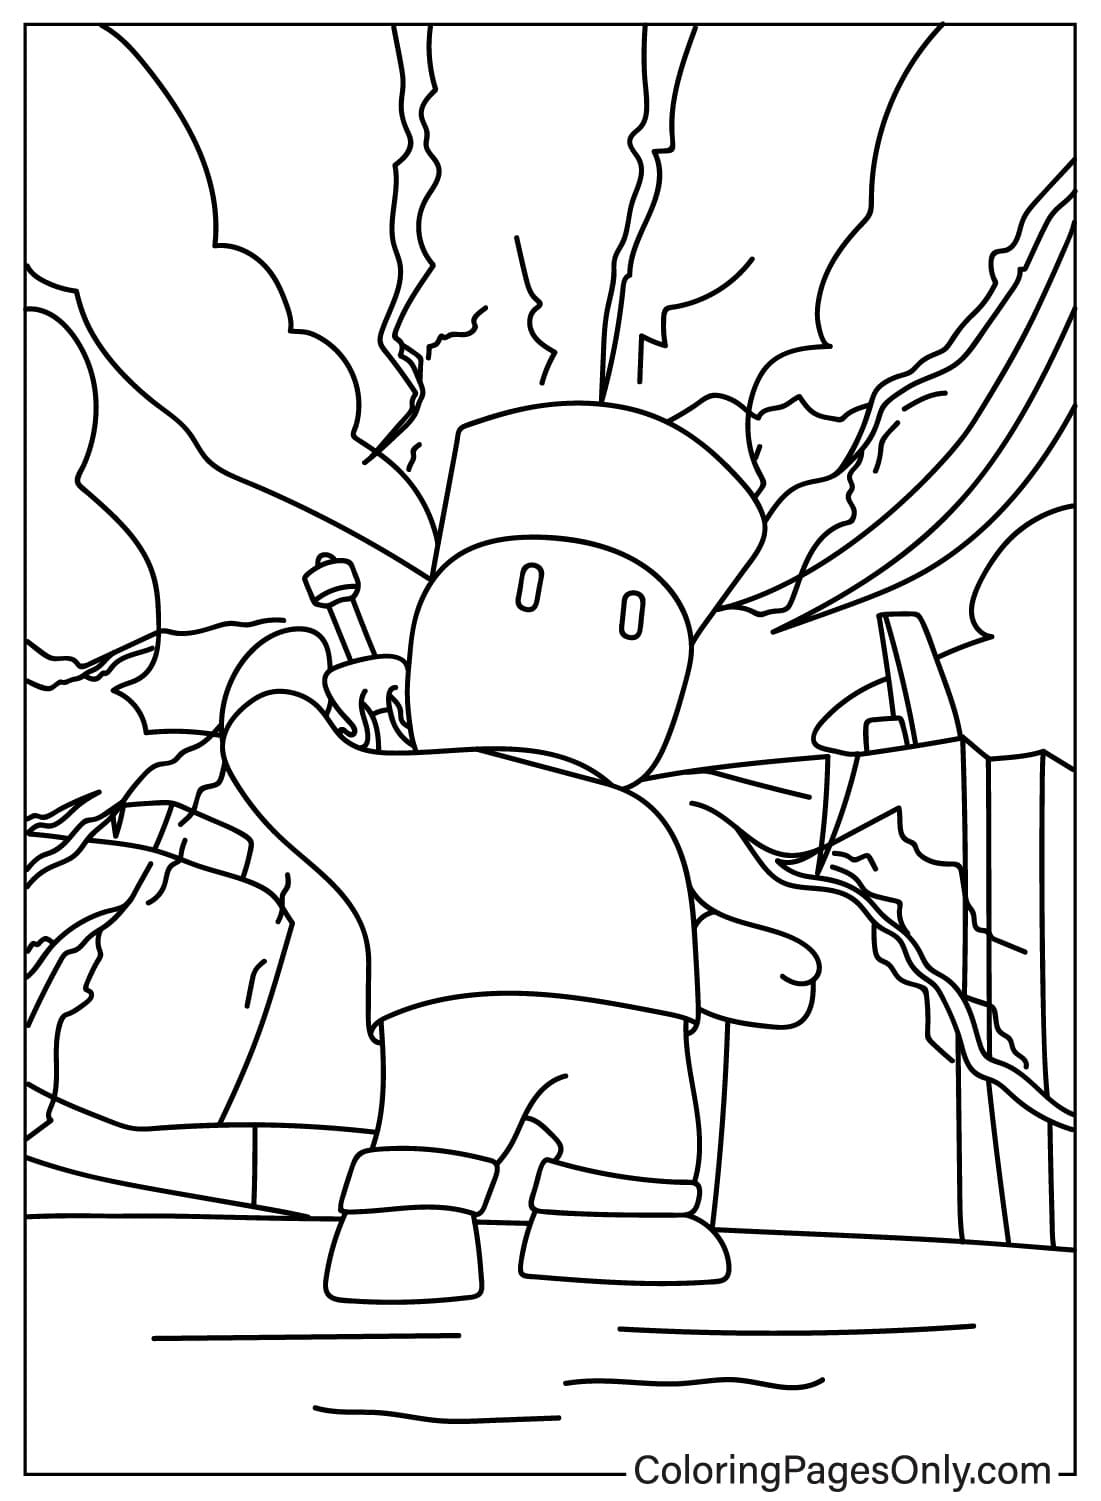 Images Stumble Guys Coloring Page from Stumble Guys